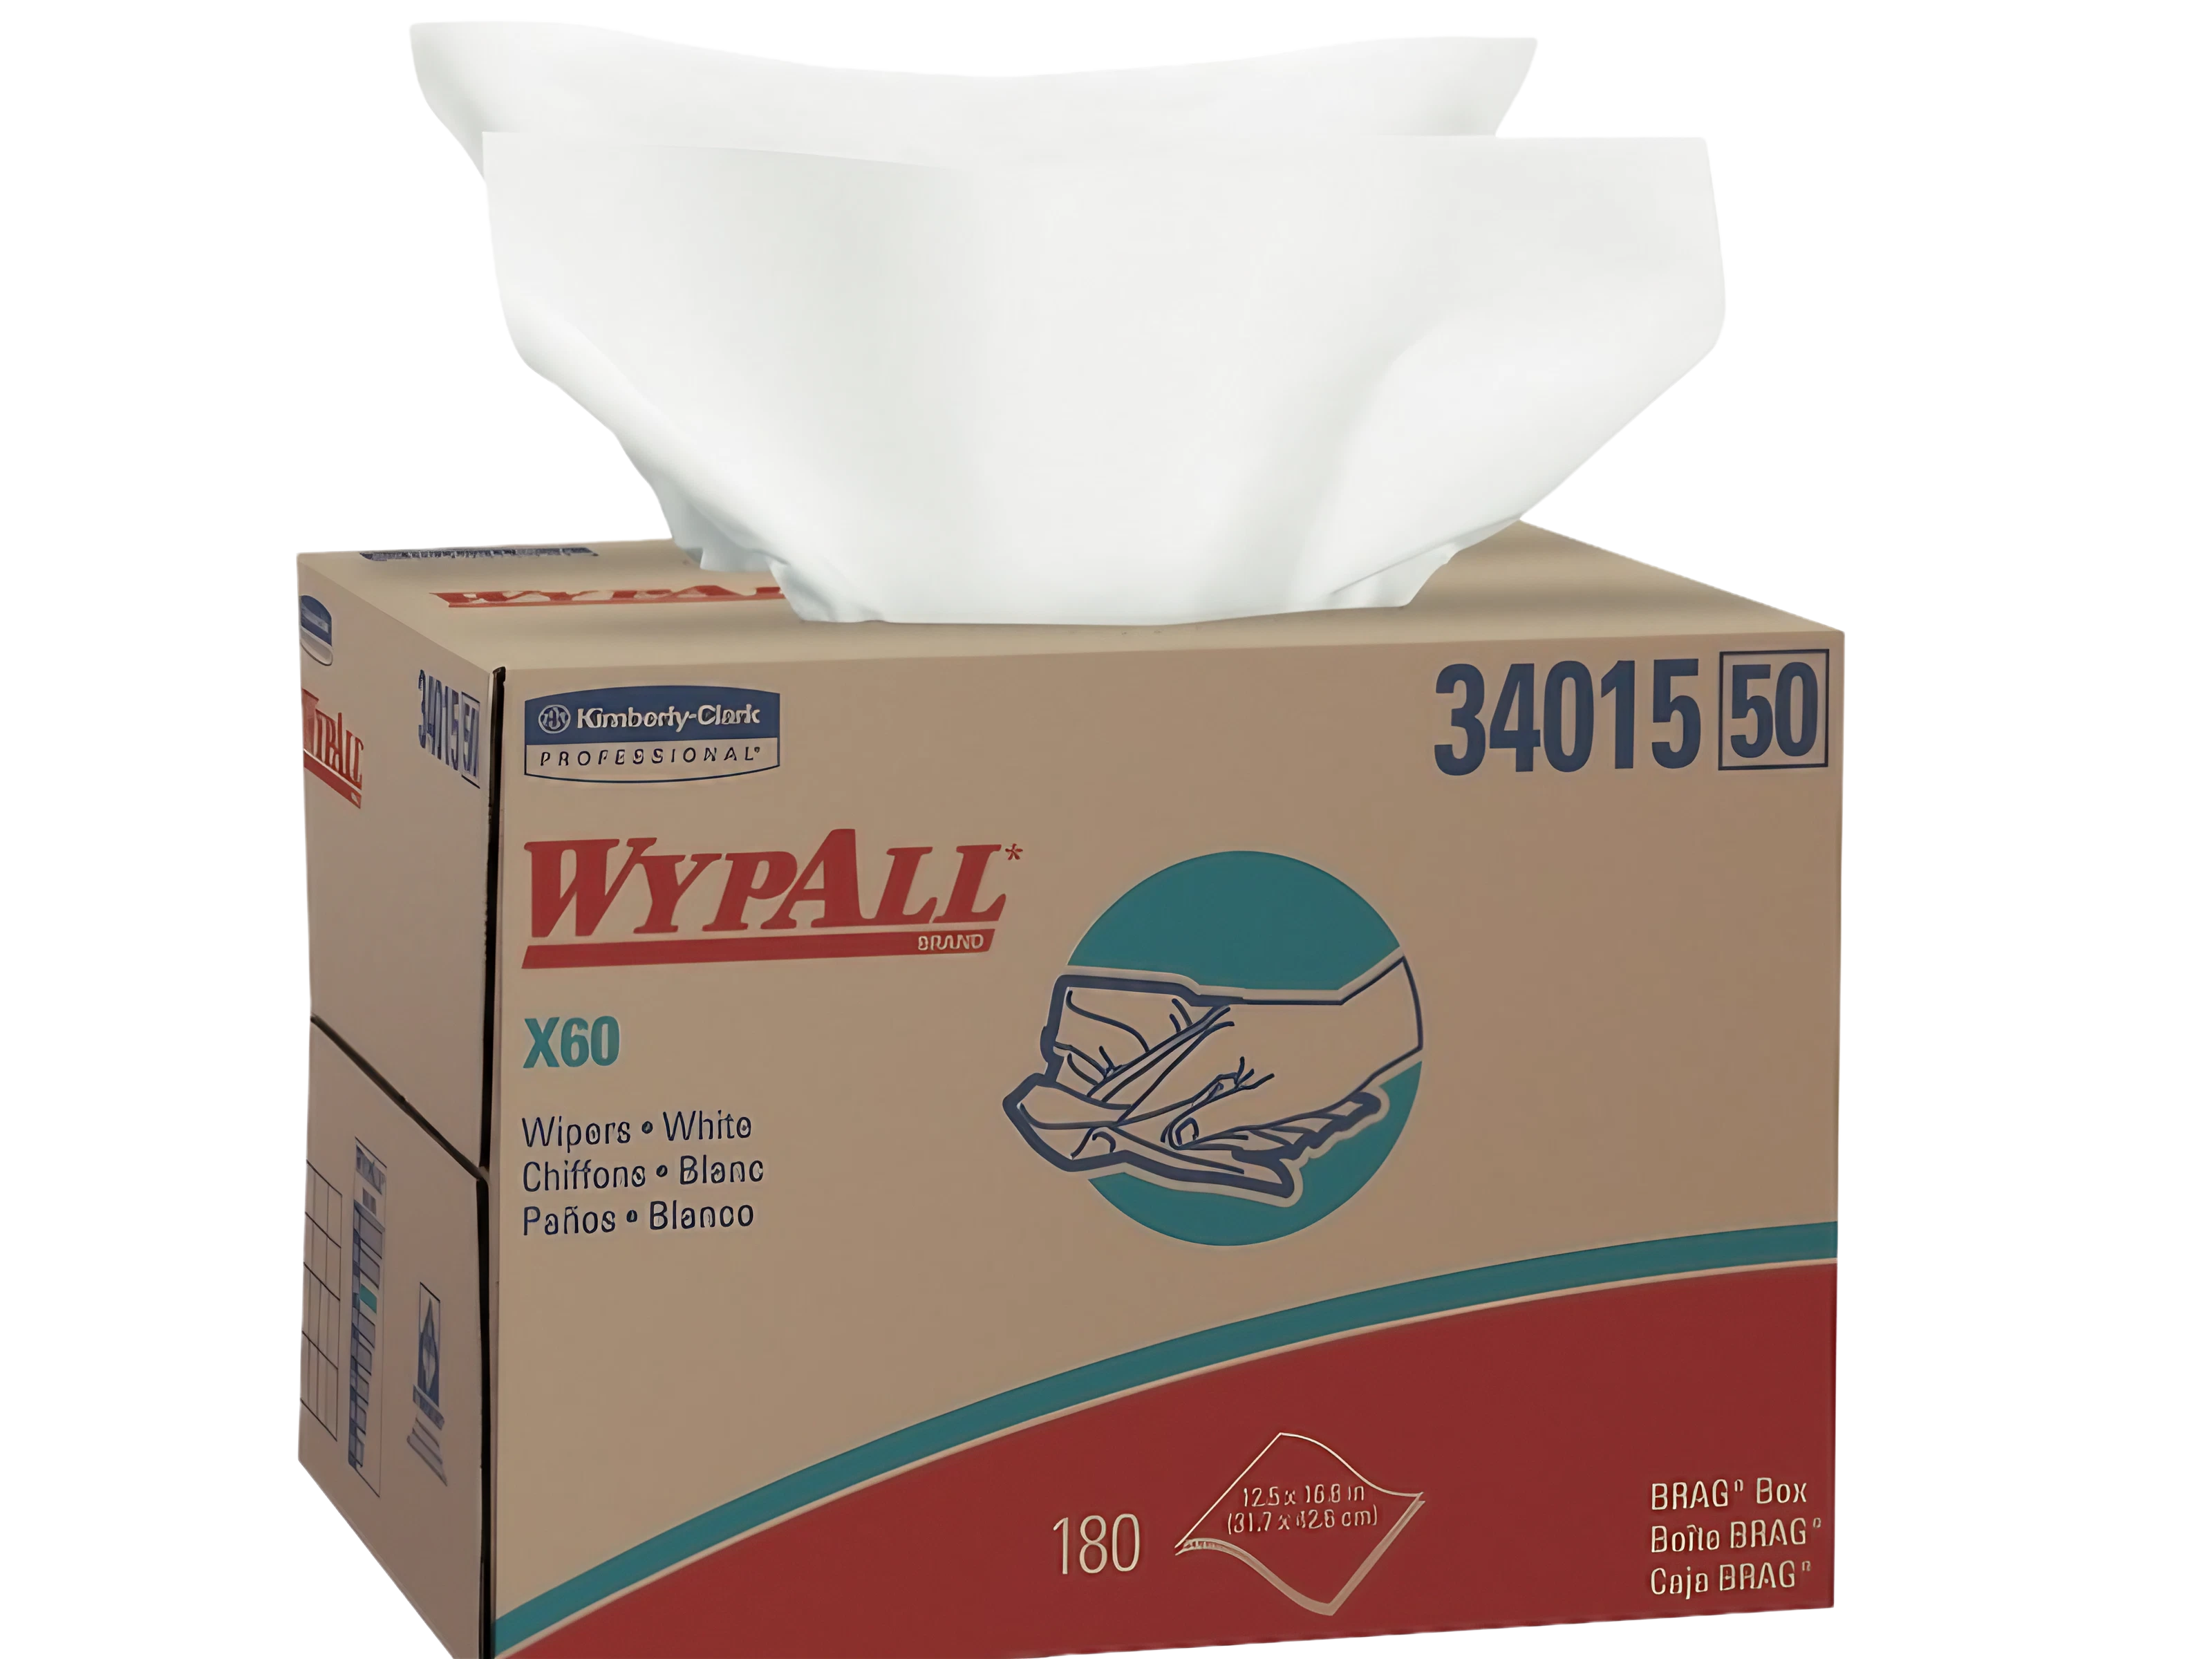 WYPALL X60 Wipers